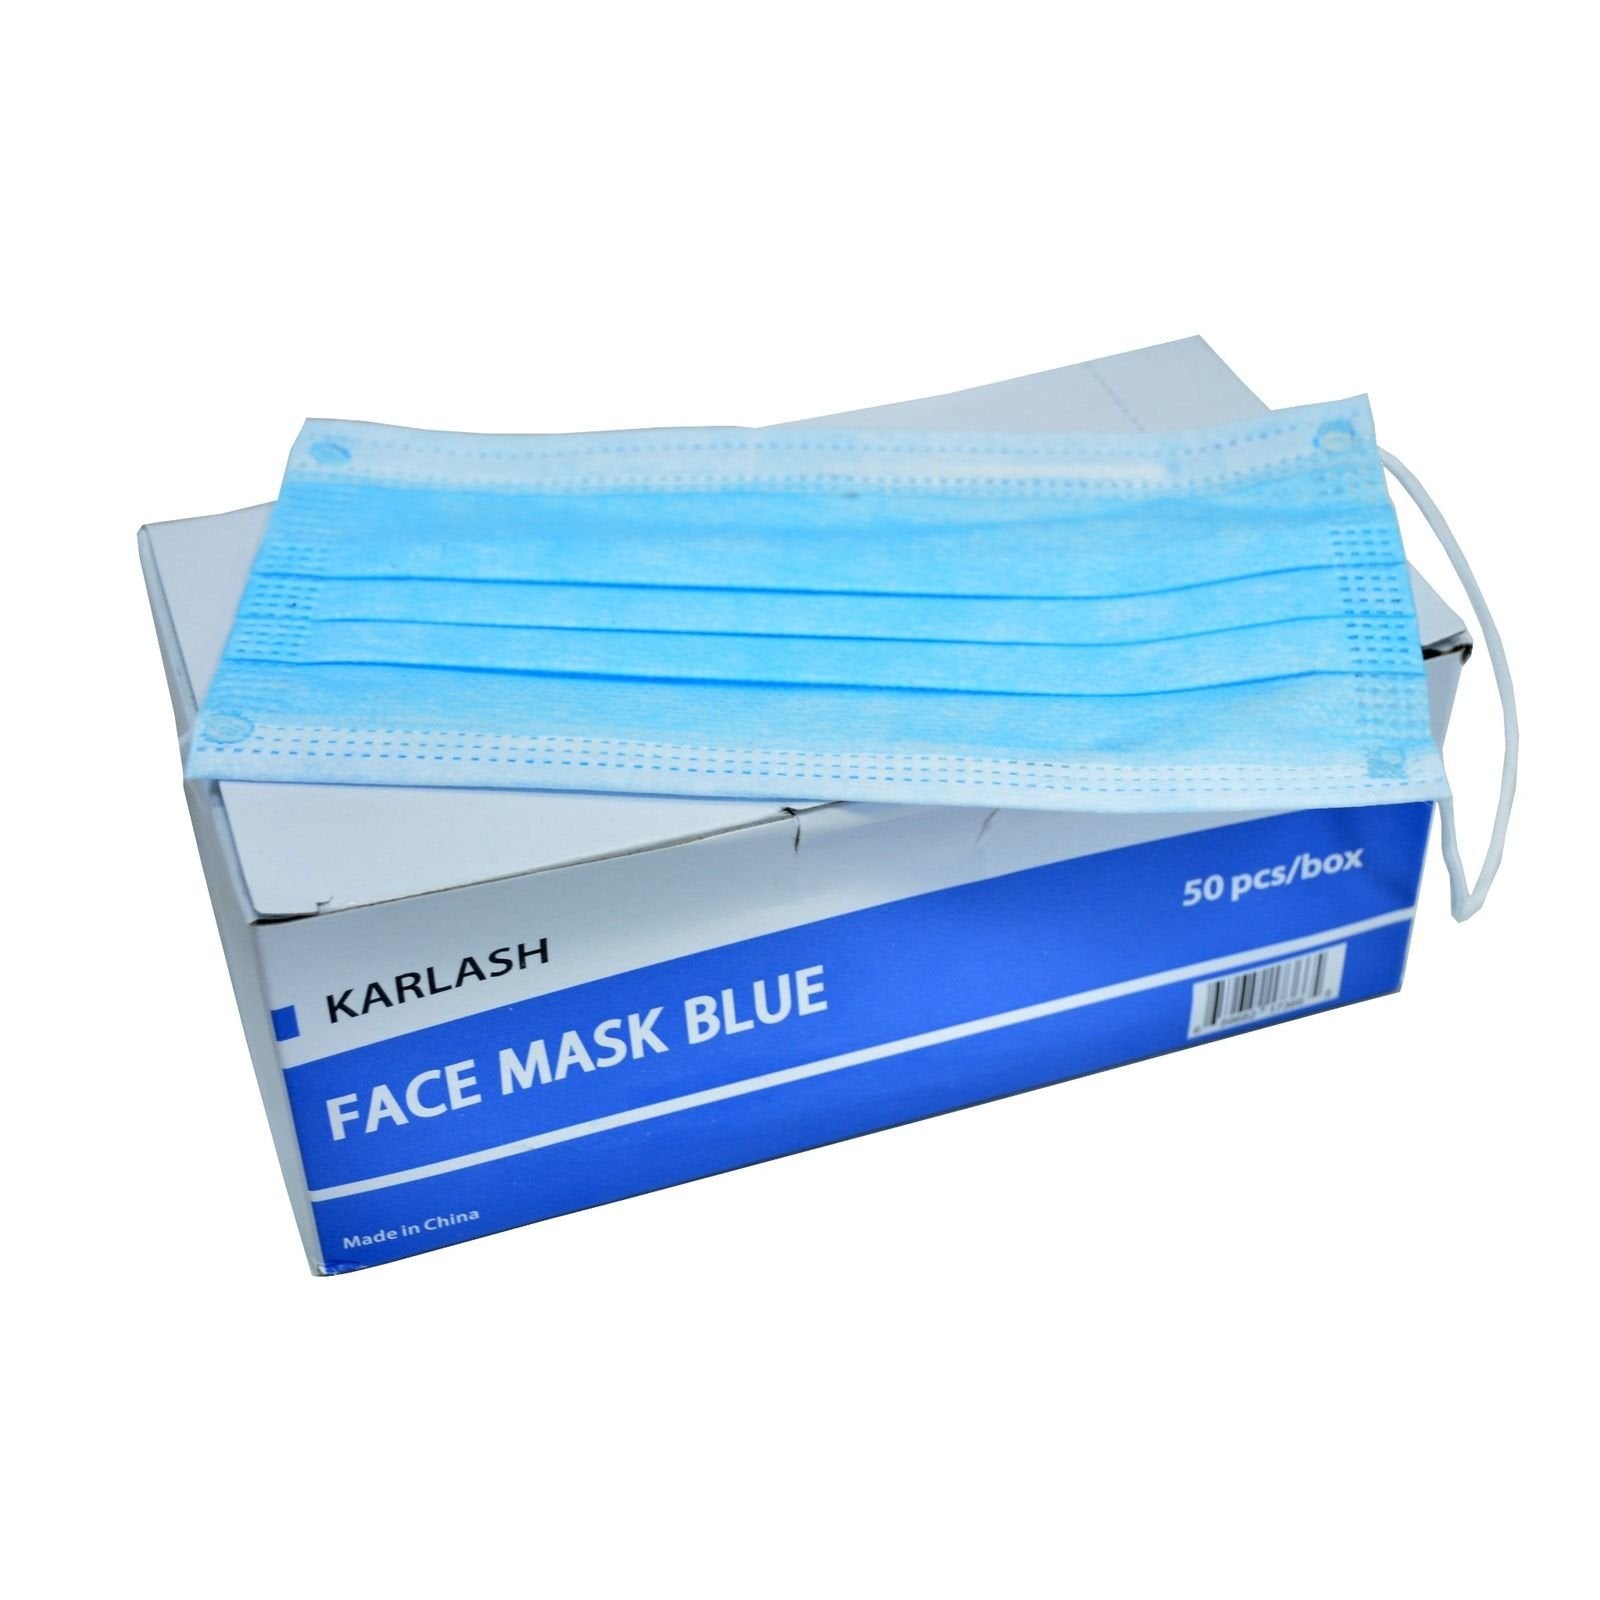 Karlash Four Layer 4-Ply Disposable Earloop Face Mask Filter Antivirus Bacteria Blue - 50 Pieces